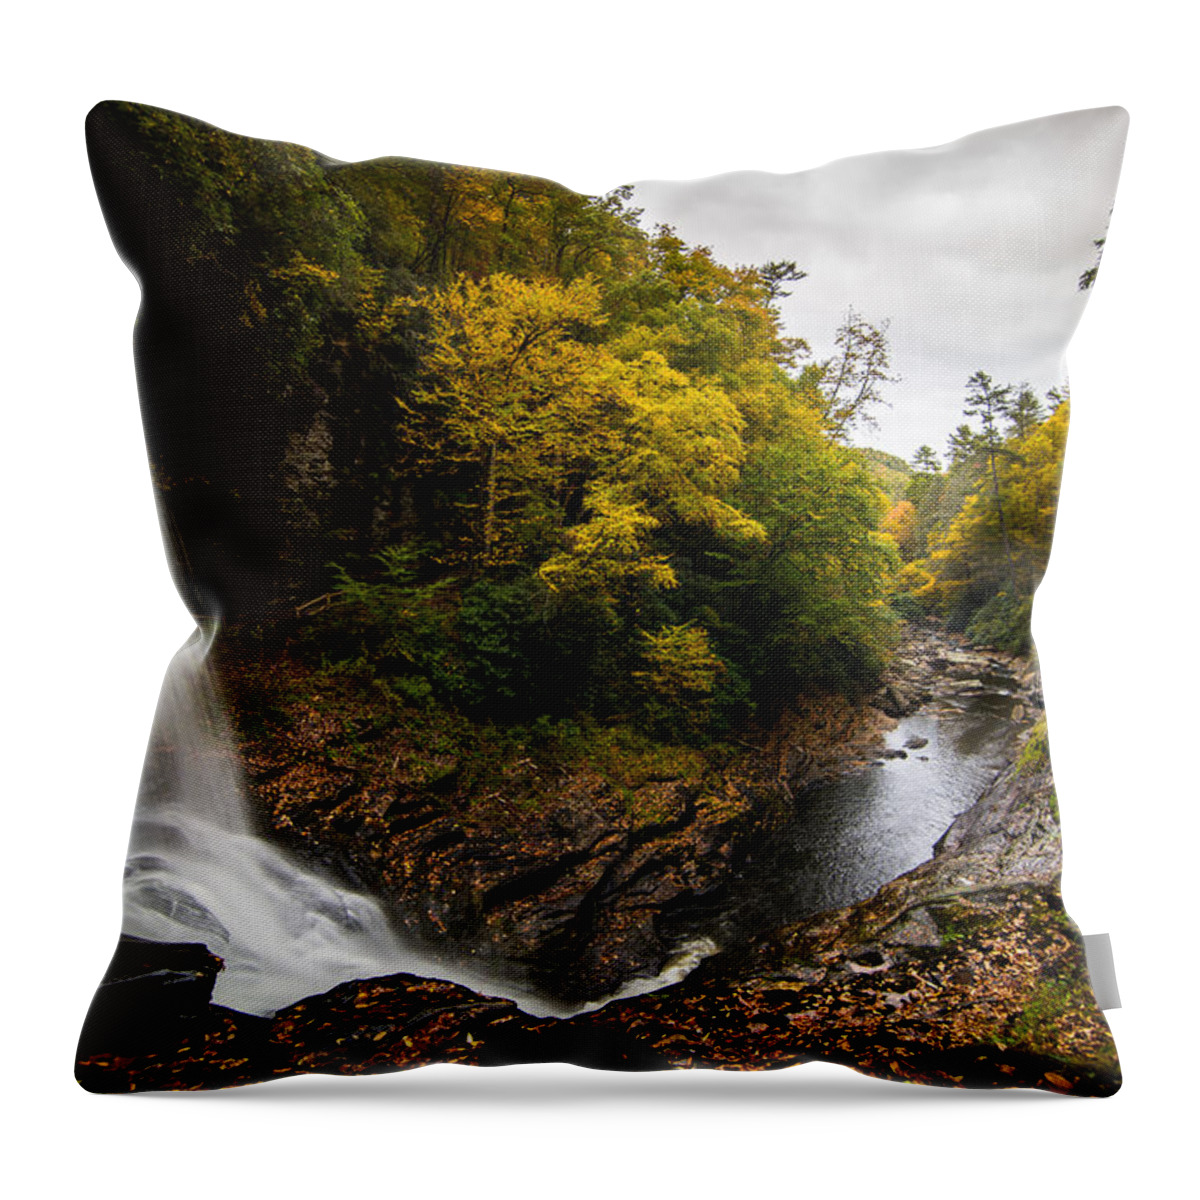 Waterfall Throw Pillow featuring the photograph Autumn Flow by Serge Skiba